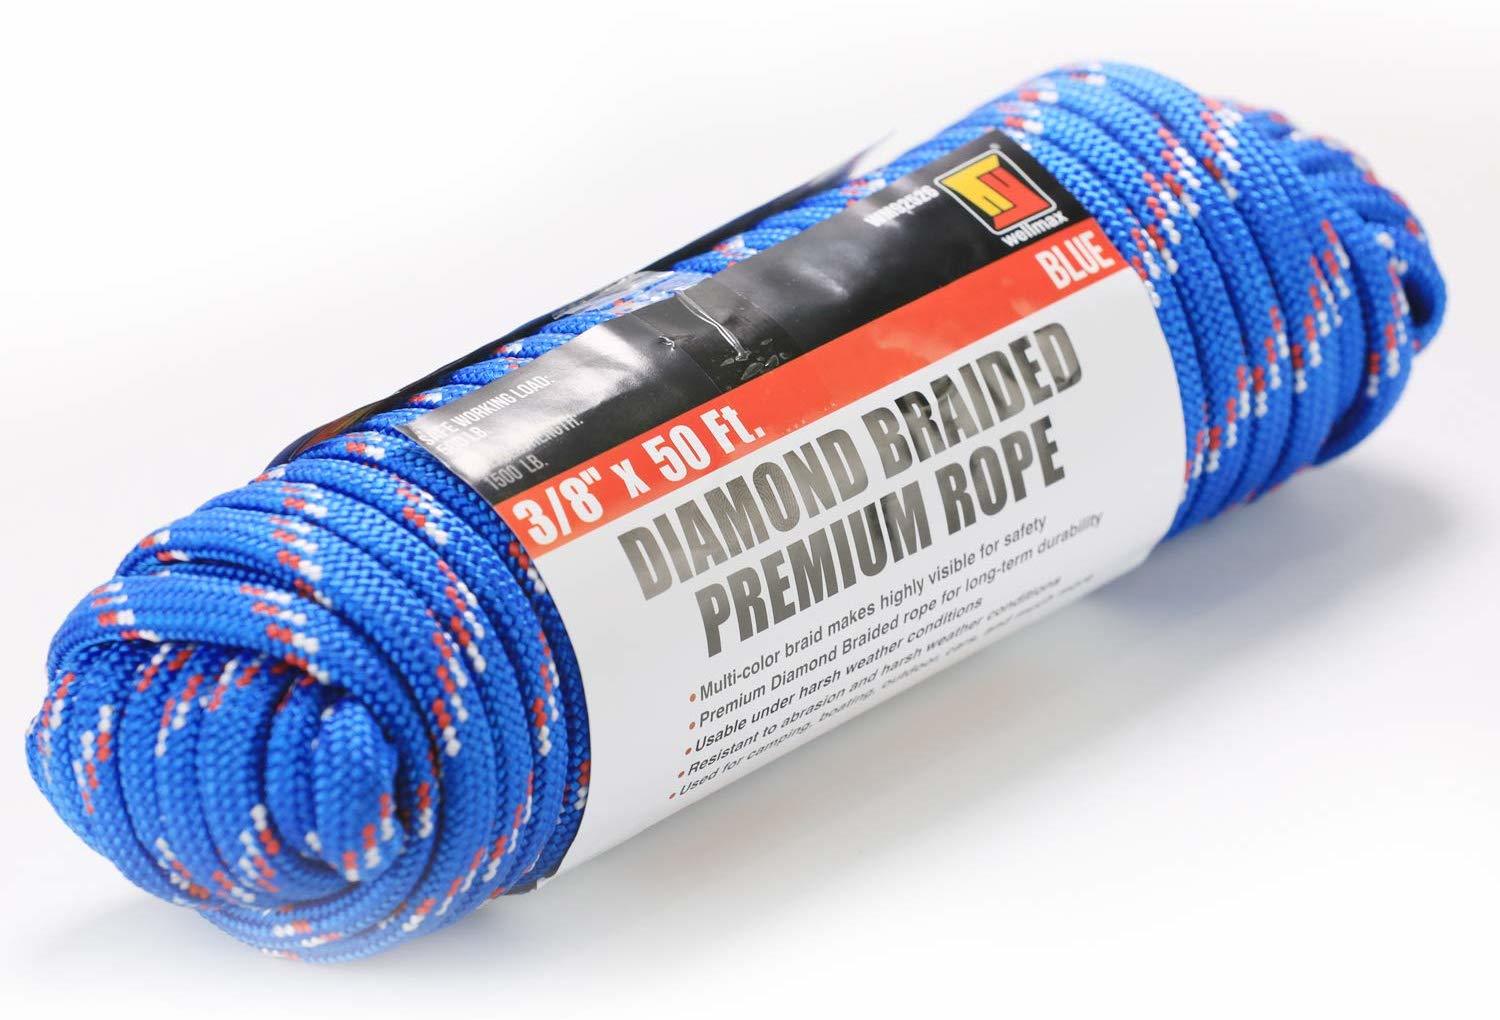 8 Sailing Rope that is Convenient to Use for Any Water Activities 7